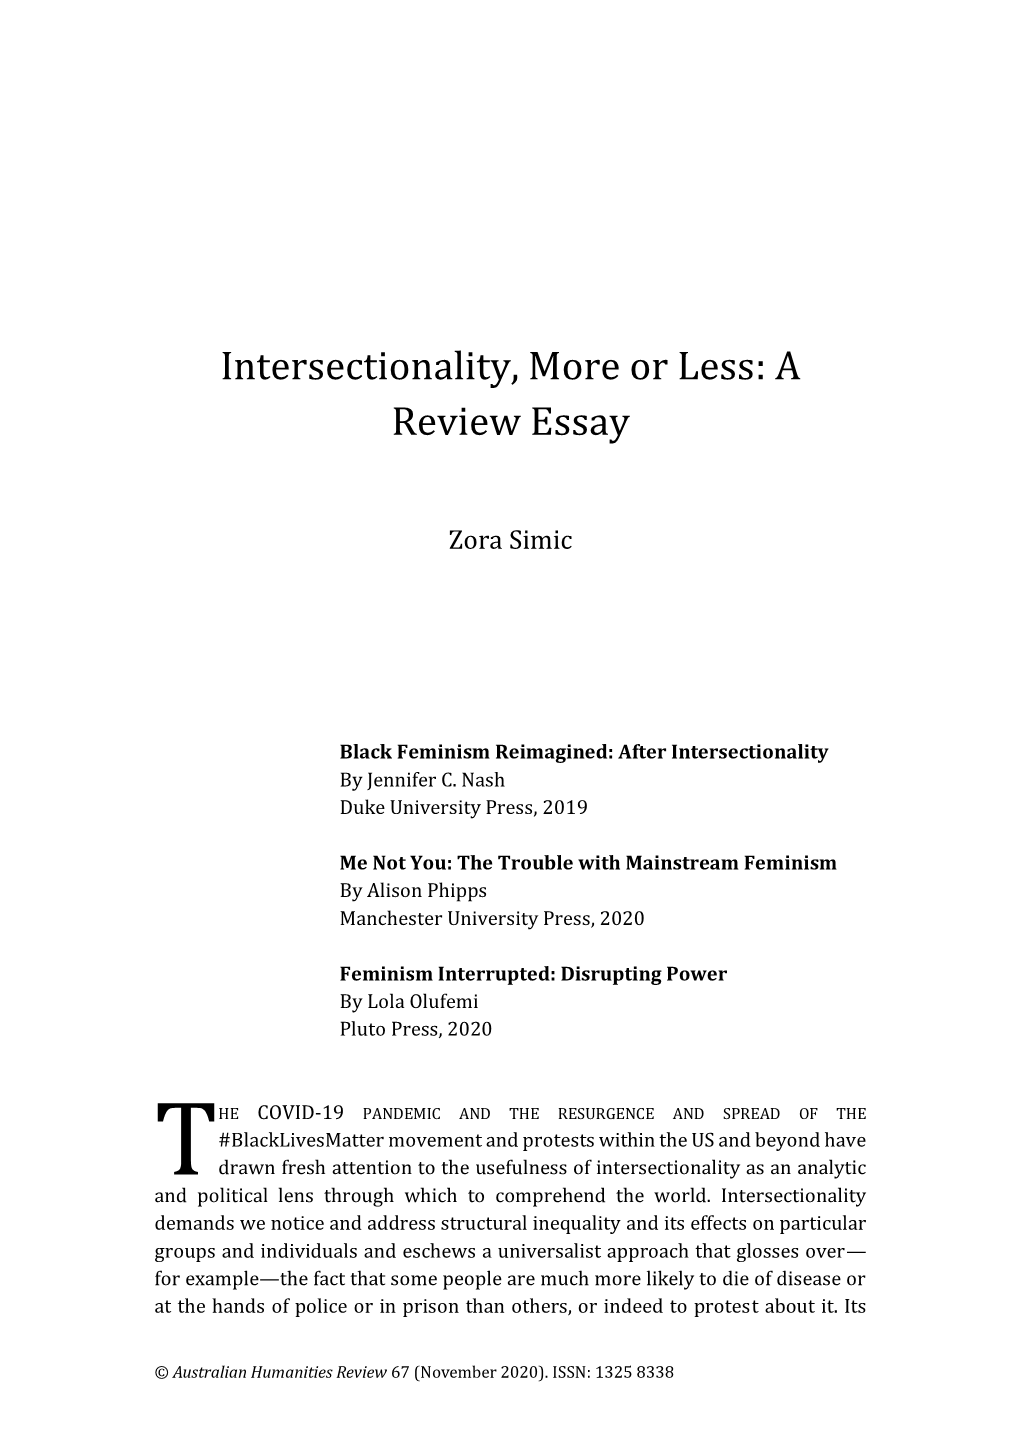 Intersectionality, More Or Less: a Review Essay